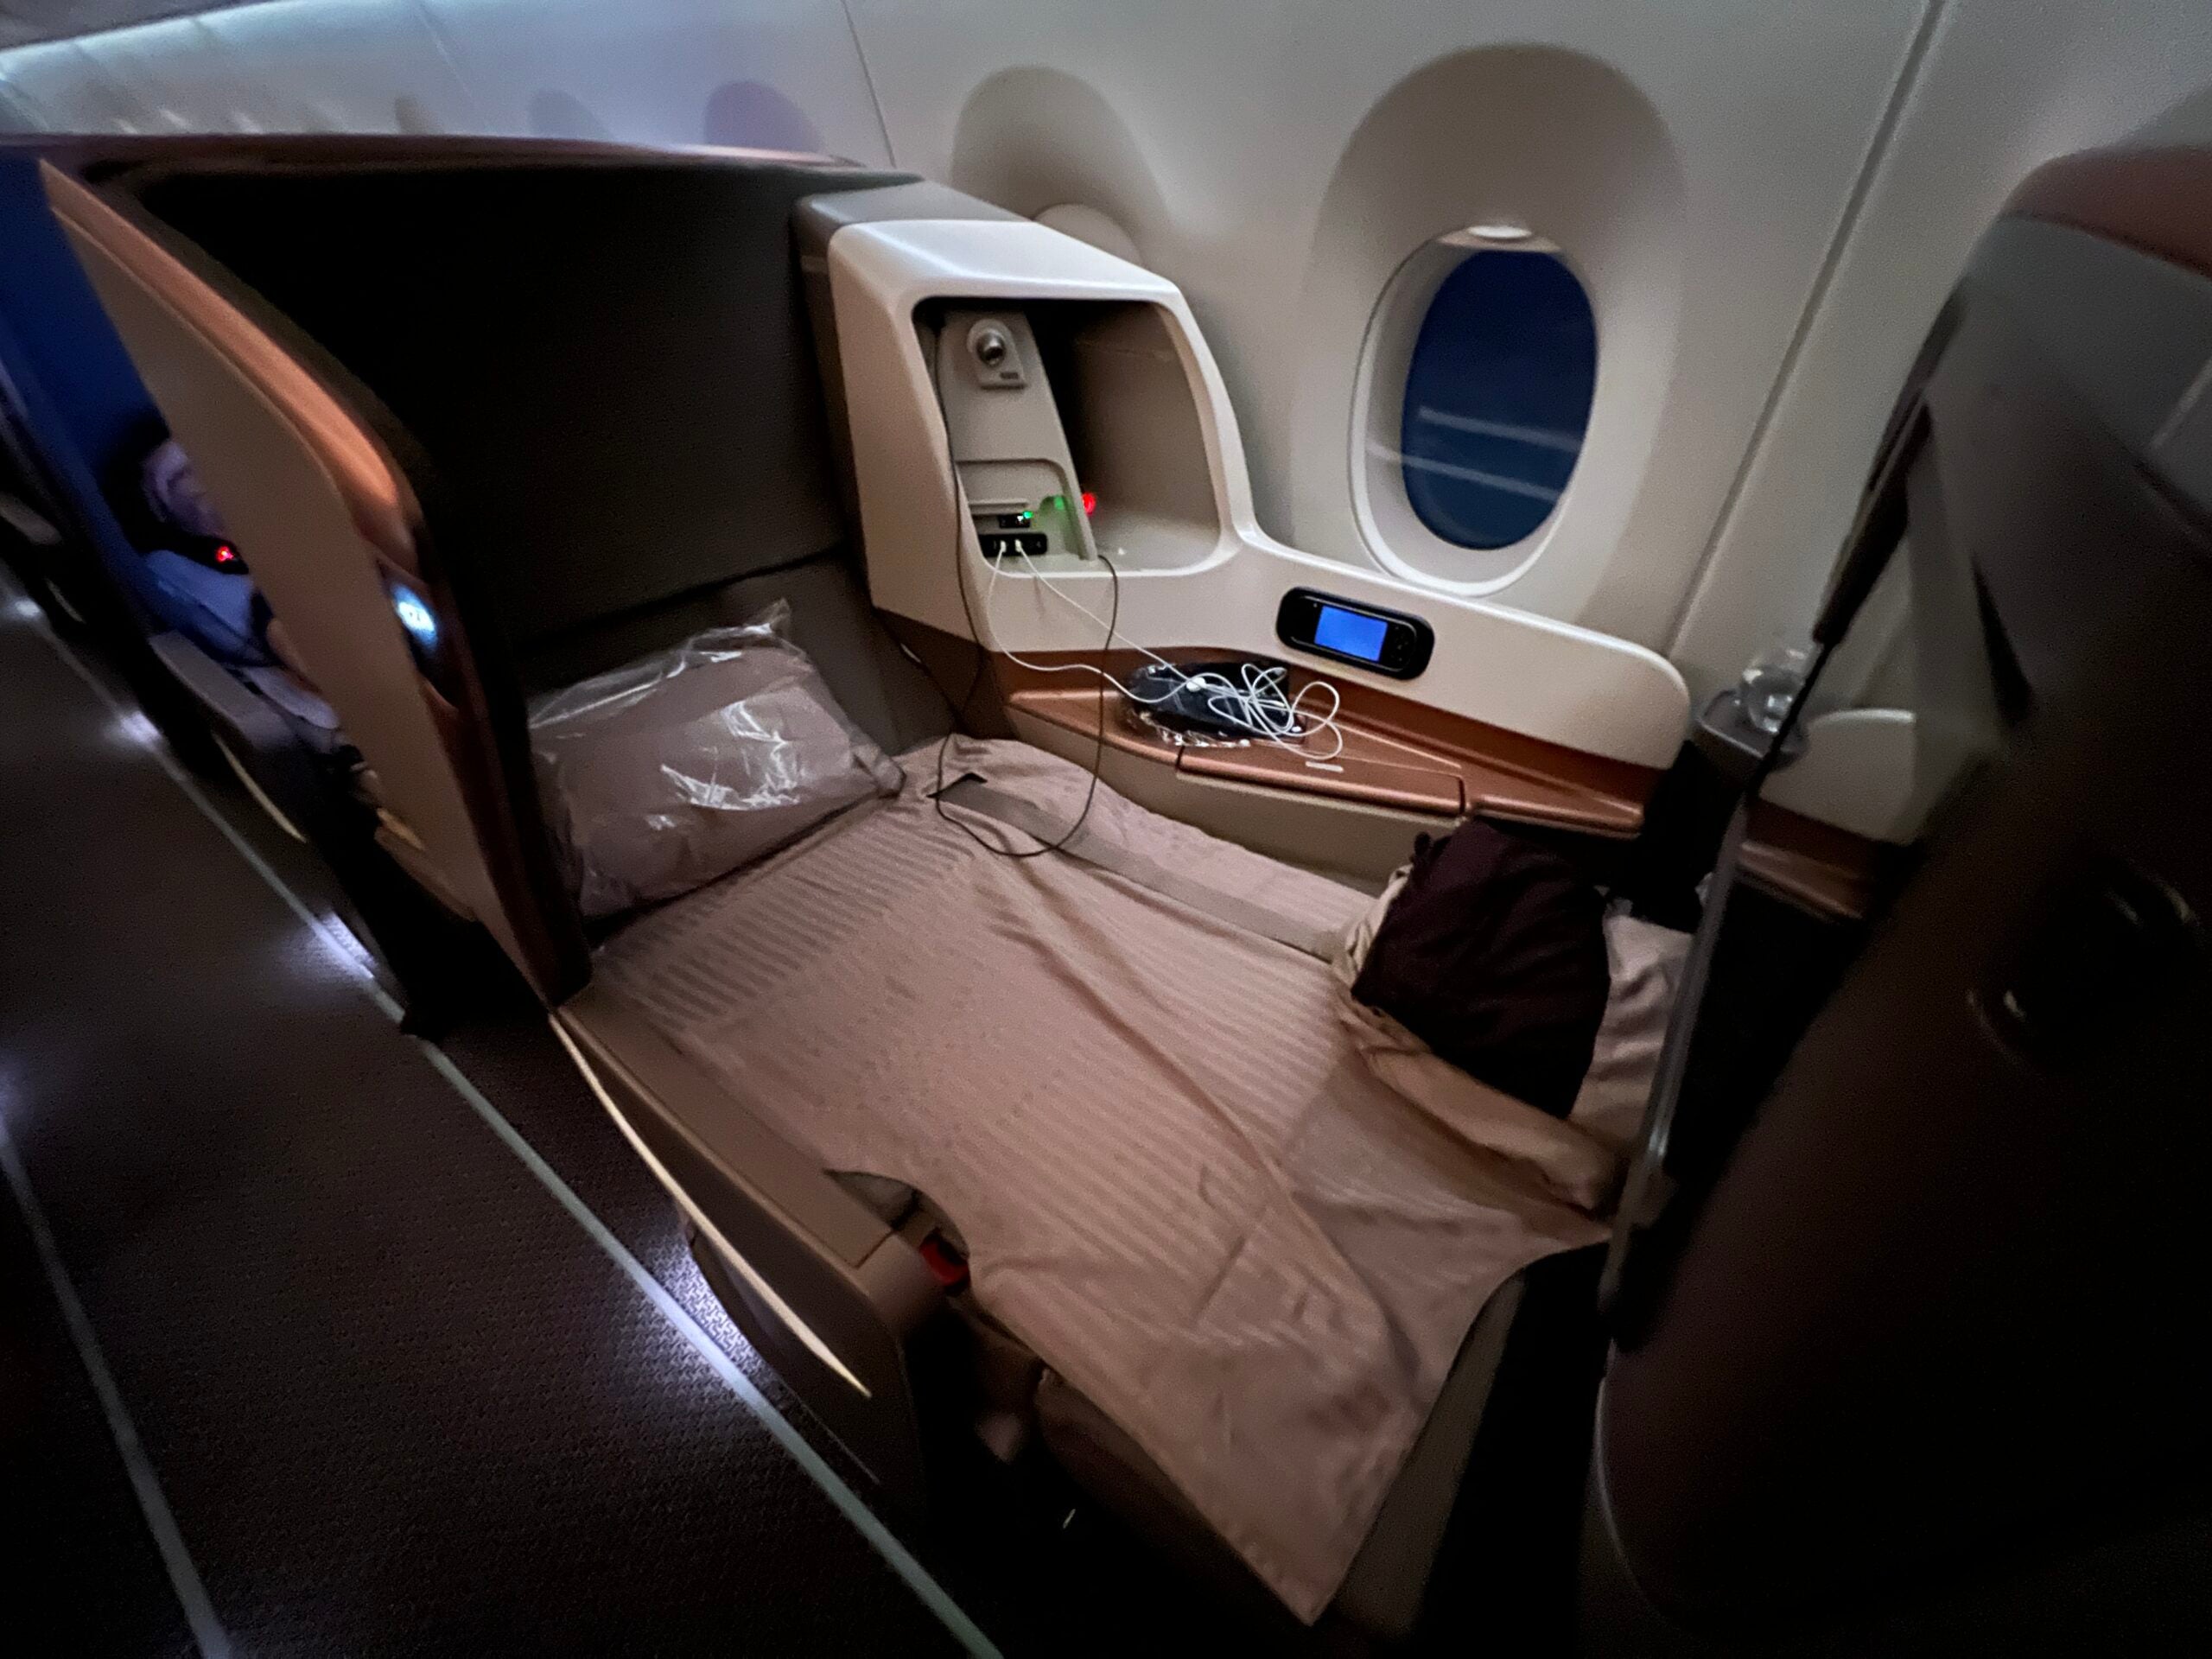 Singapore Airlines business class accommodation